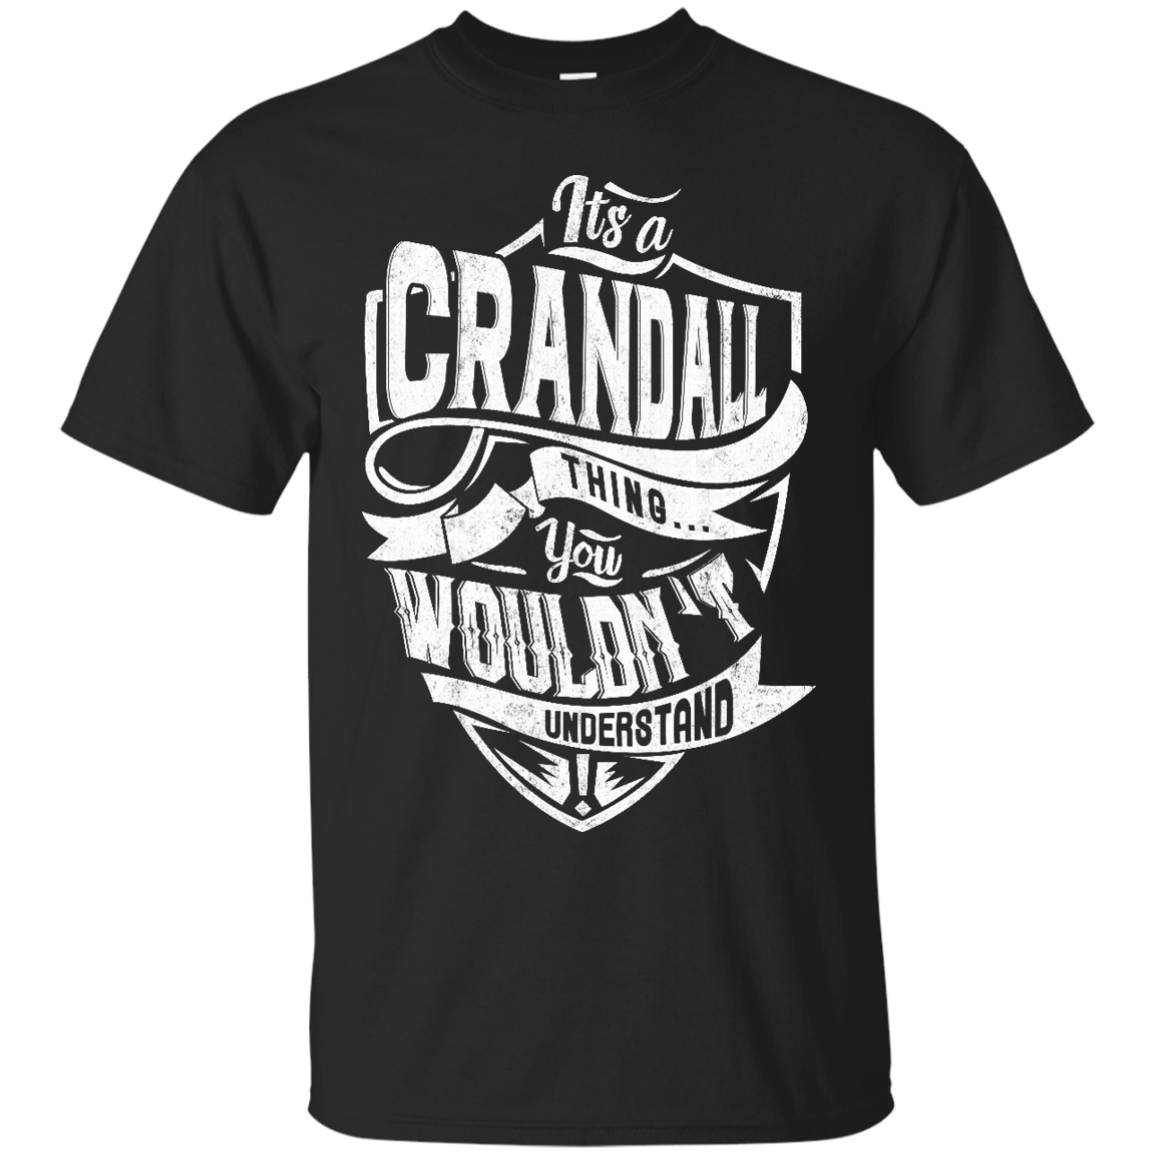 Crandall Shirts It's A Crandall Thing You Wouldn't Understand - Amyna